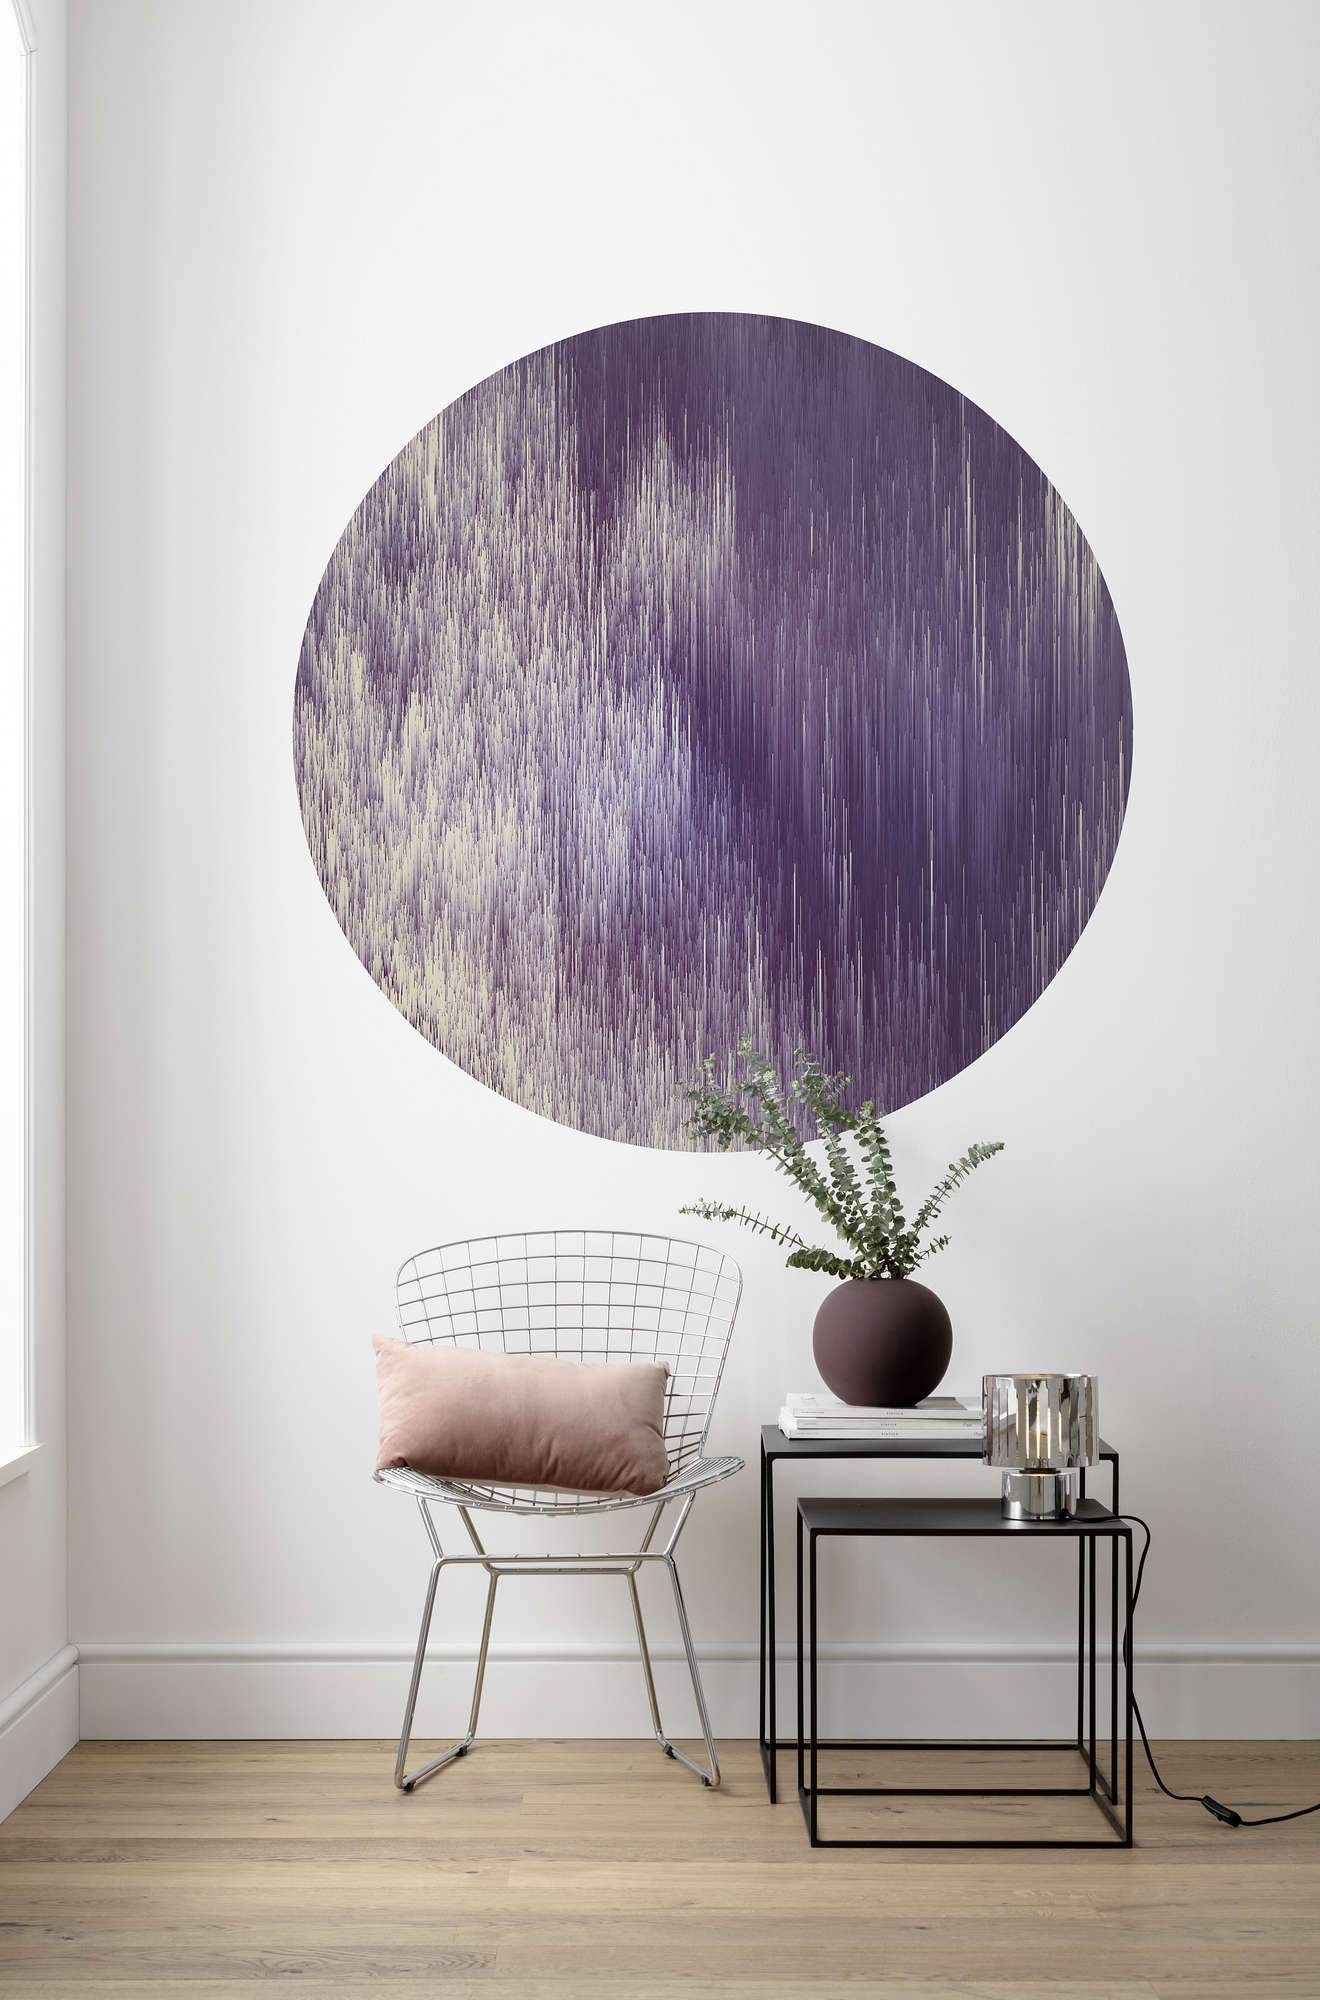 Amethyst Highlights Circle Wall Art (Self-Adhesive)-Wall Decor-ABSTRACT WALLPAPERS, CIRCLE WALL ART, ECO MURALS, NATURE WALL ART, PATTERN WALLPAPERS, STONE WALLPAPERS, SUSTAINABLE DECOR-Forest Homes-Nature inspired decor-Nature decor